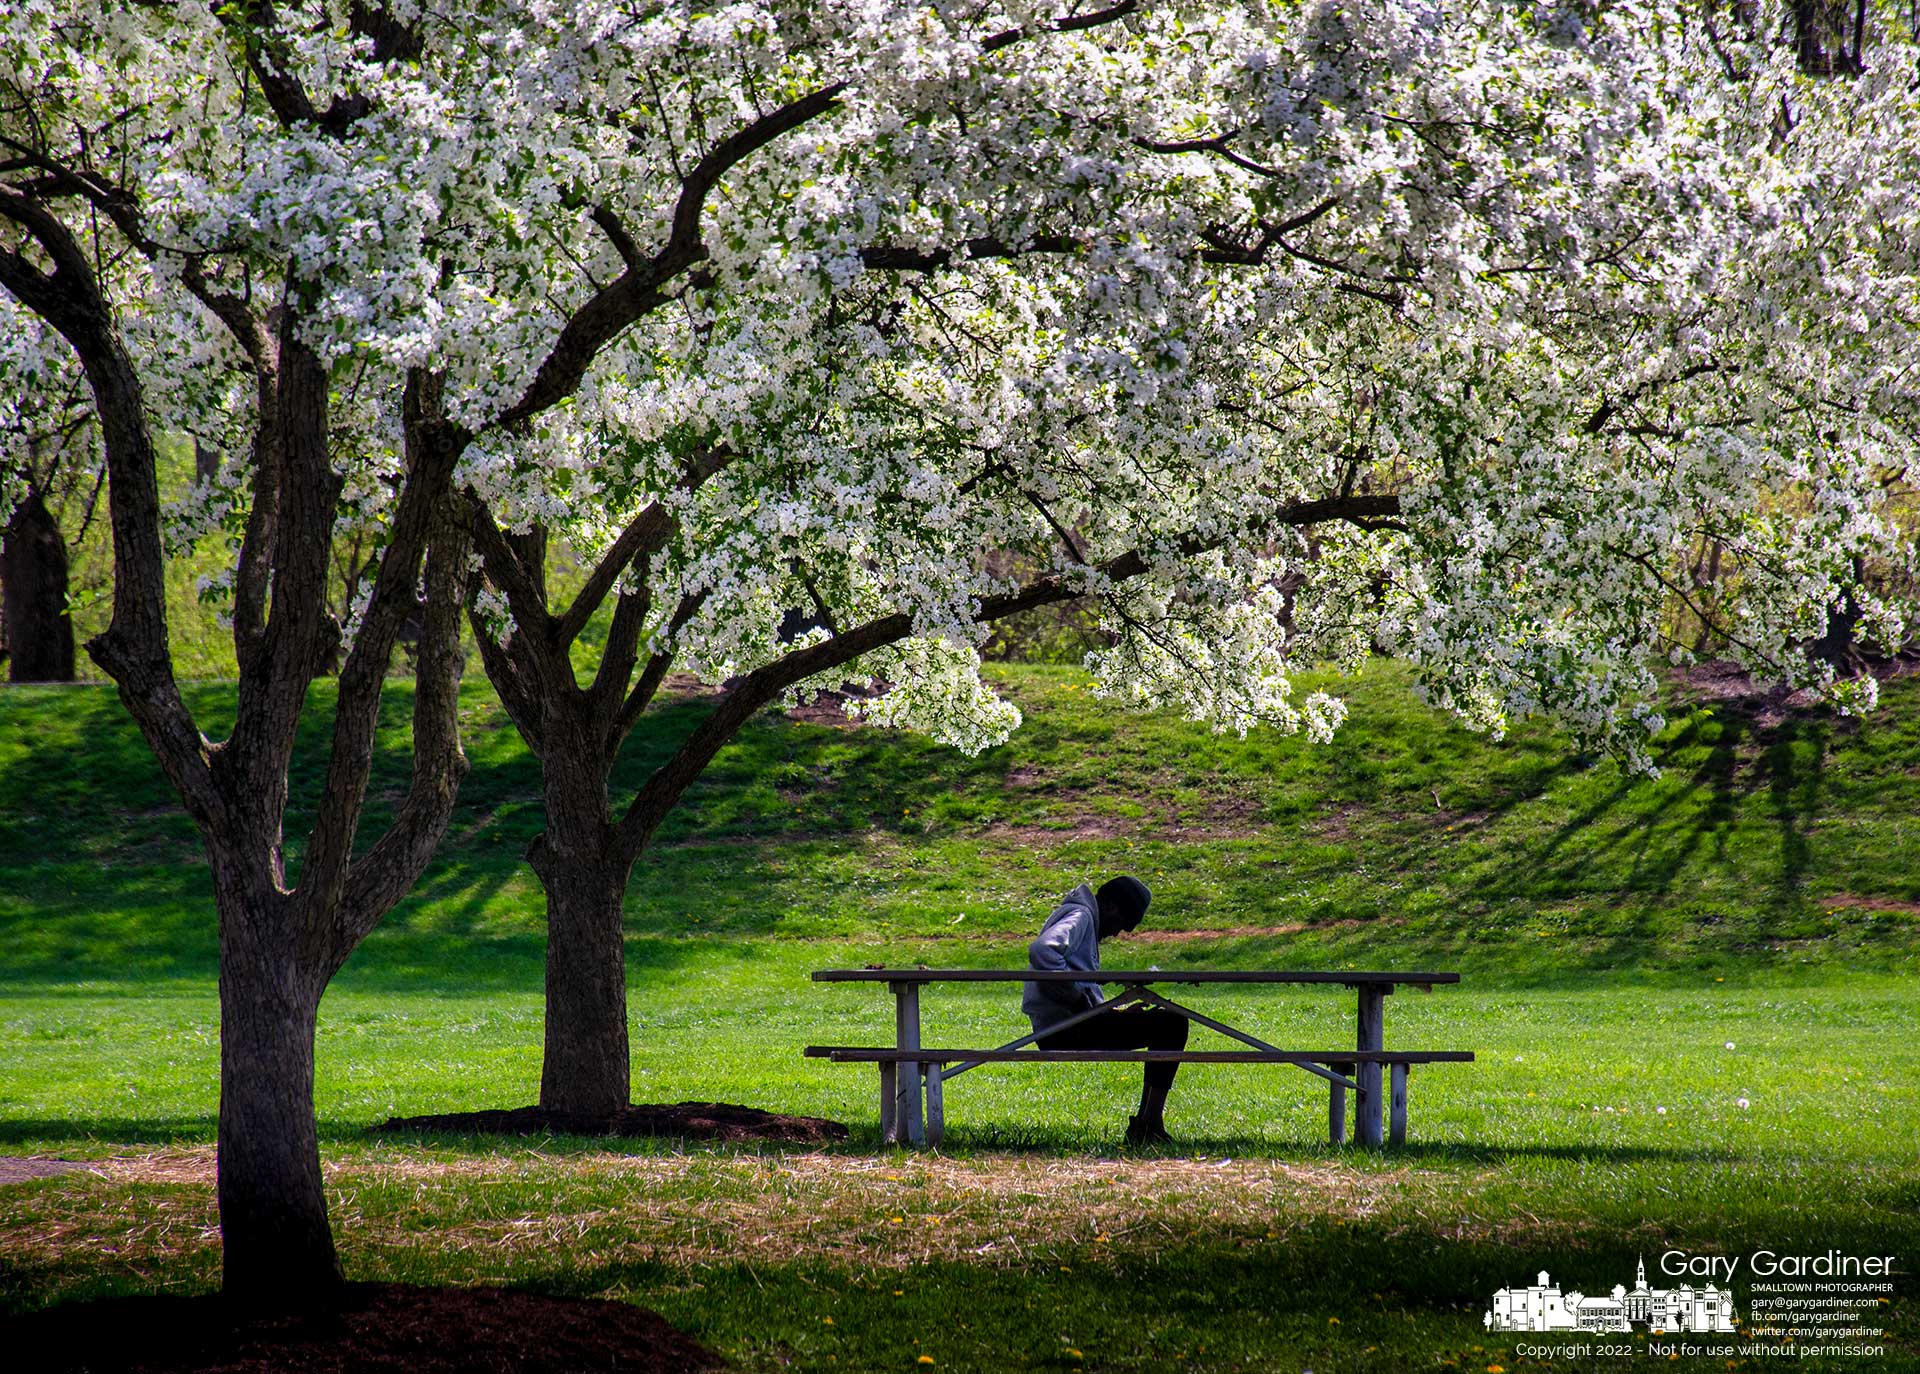 A man sits in the shade of a tree in full bloom next to the sports field at Alum Creek Park North. My Final Photo for April 29, 2022.